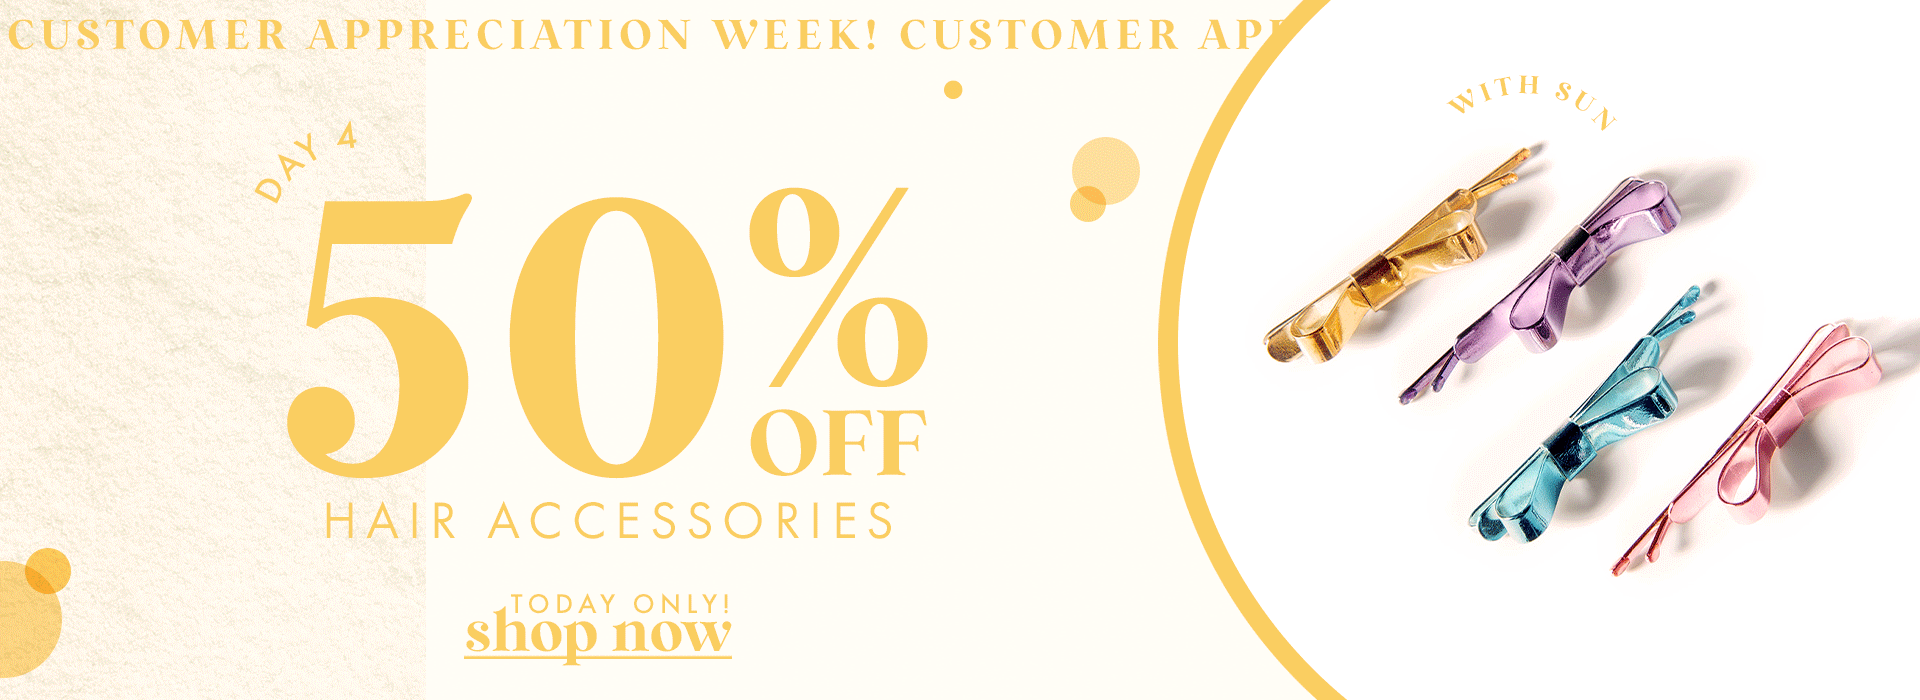 50% off hair accessories. today only!